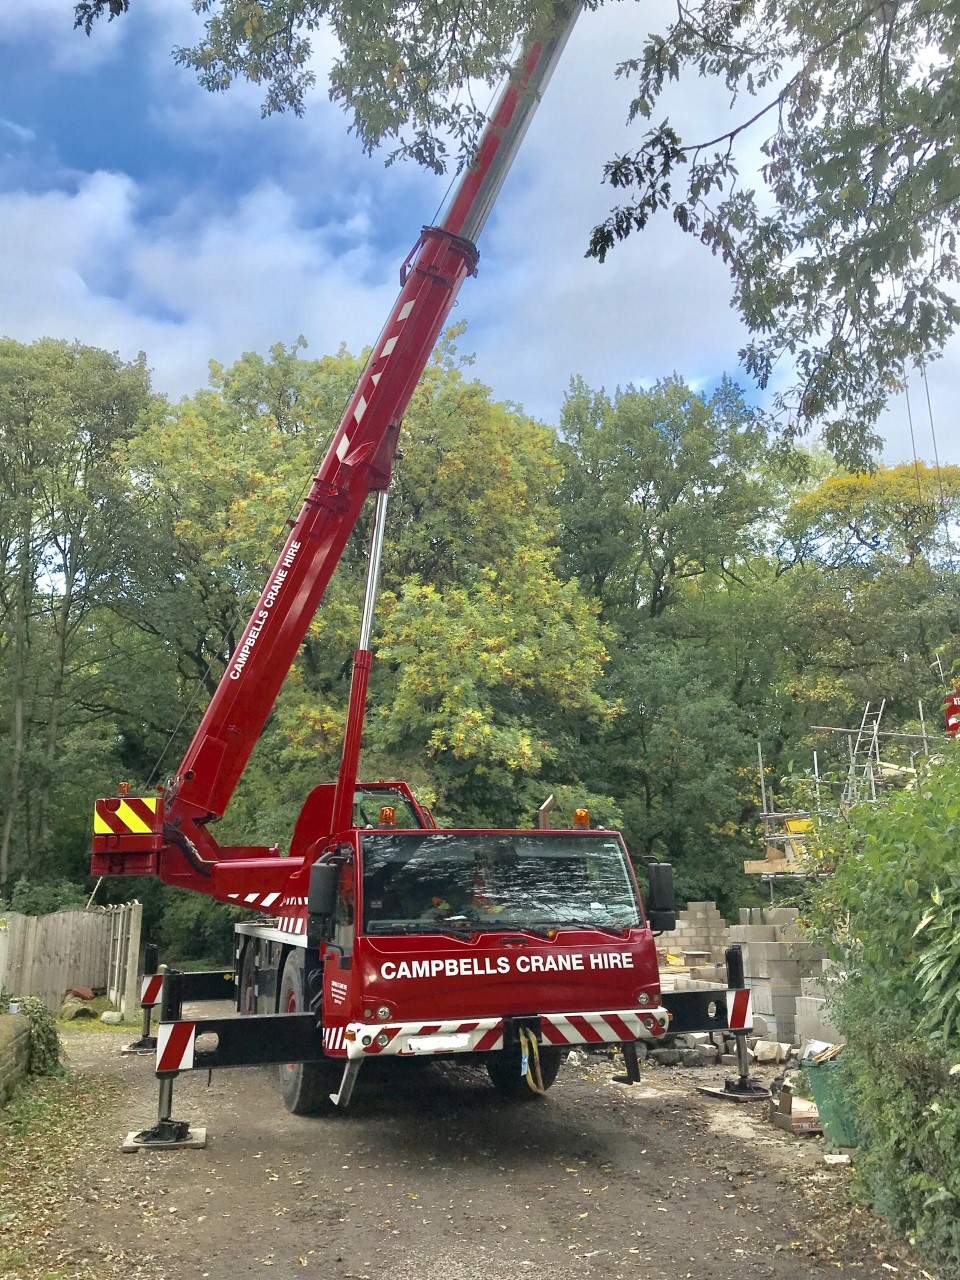 Greater Manchester Mobile Crane Hire